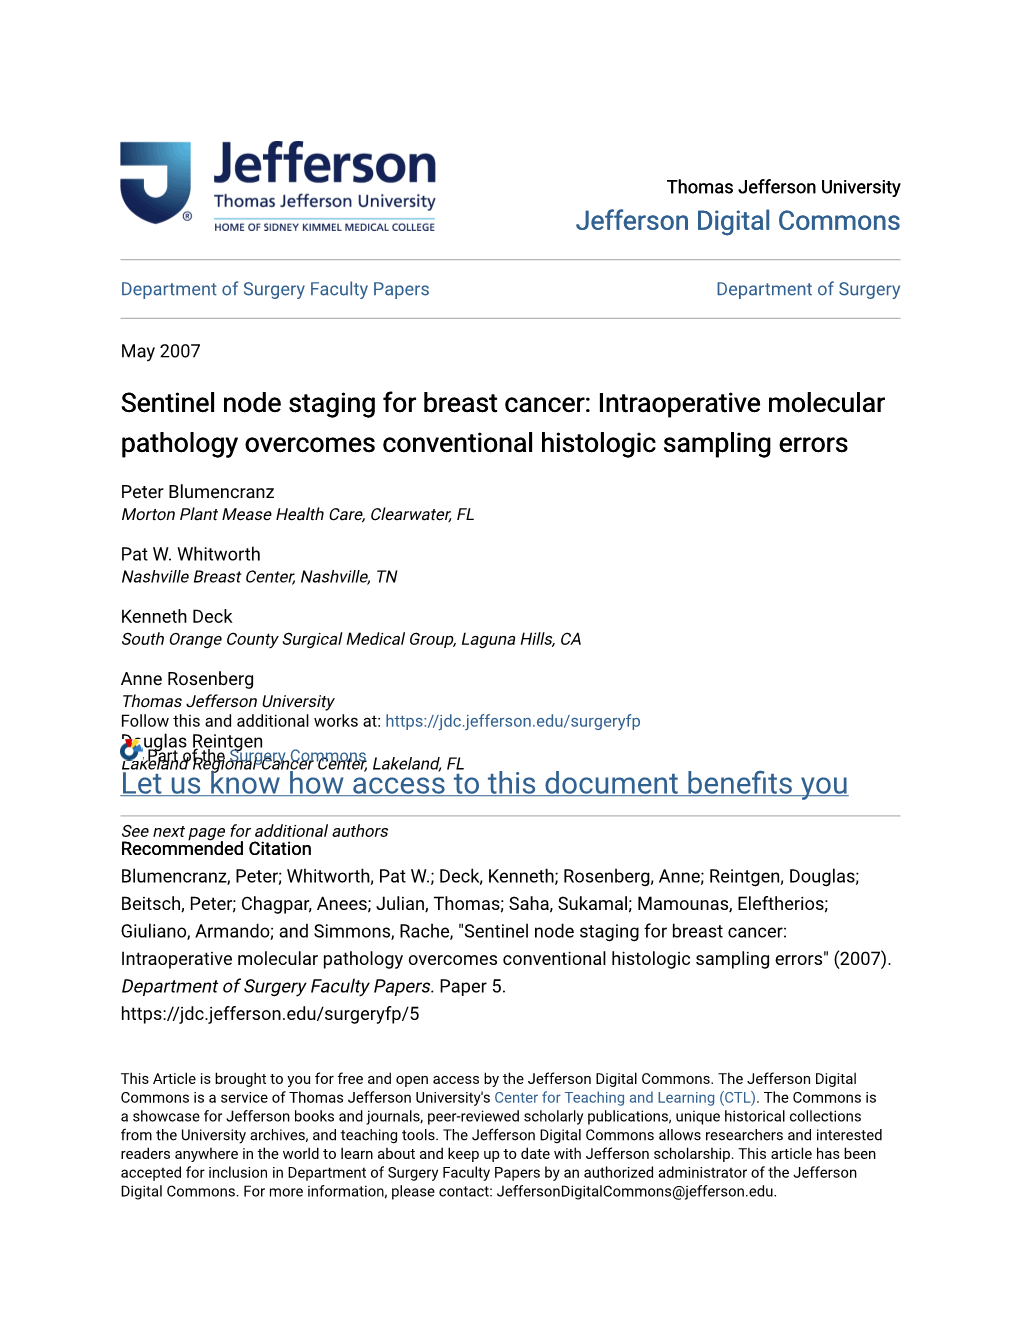 Sentinel Node Staging for Breast Cancer: Intraoperative Molecular Pathology Overcomes Conventional Histologic Sampling Errors